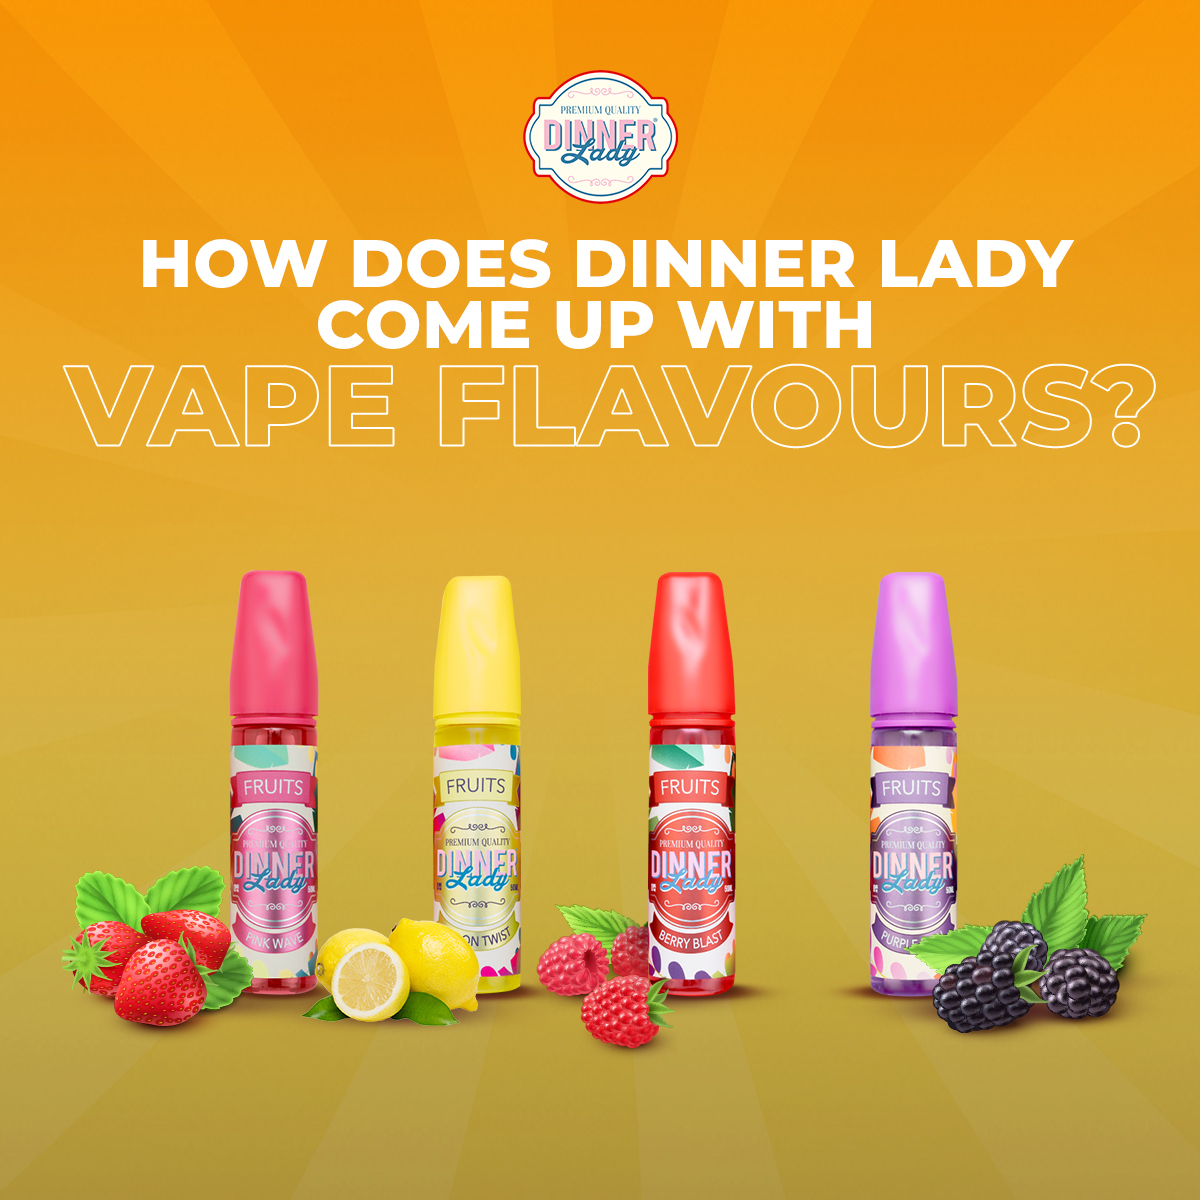 How does Dinner Lady come up with vape flavours?